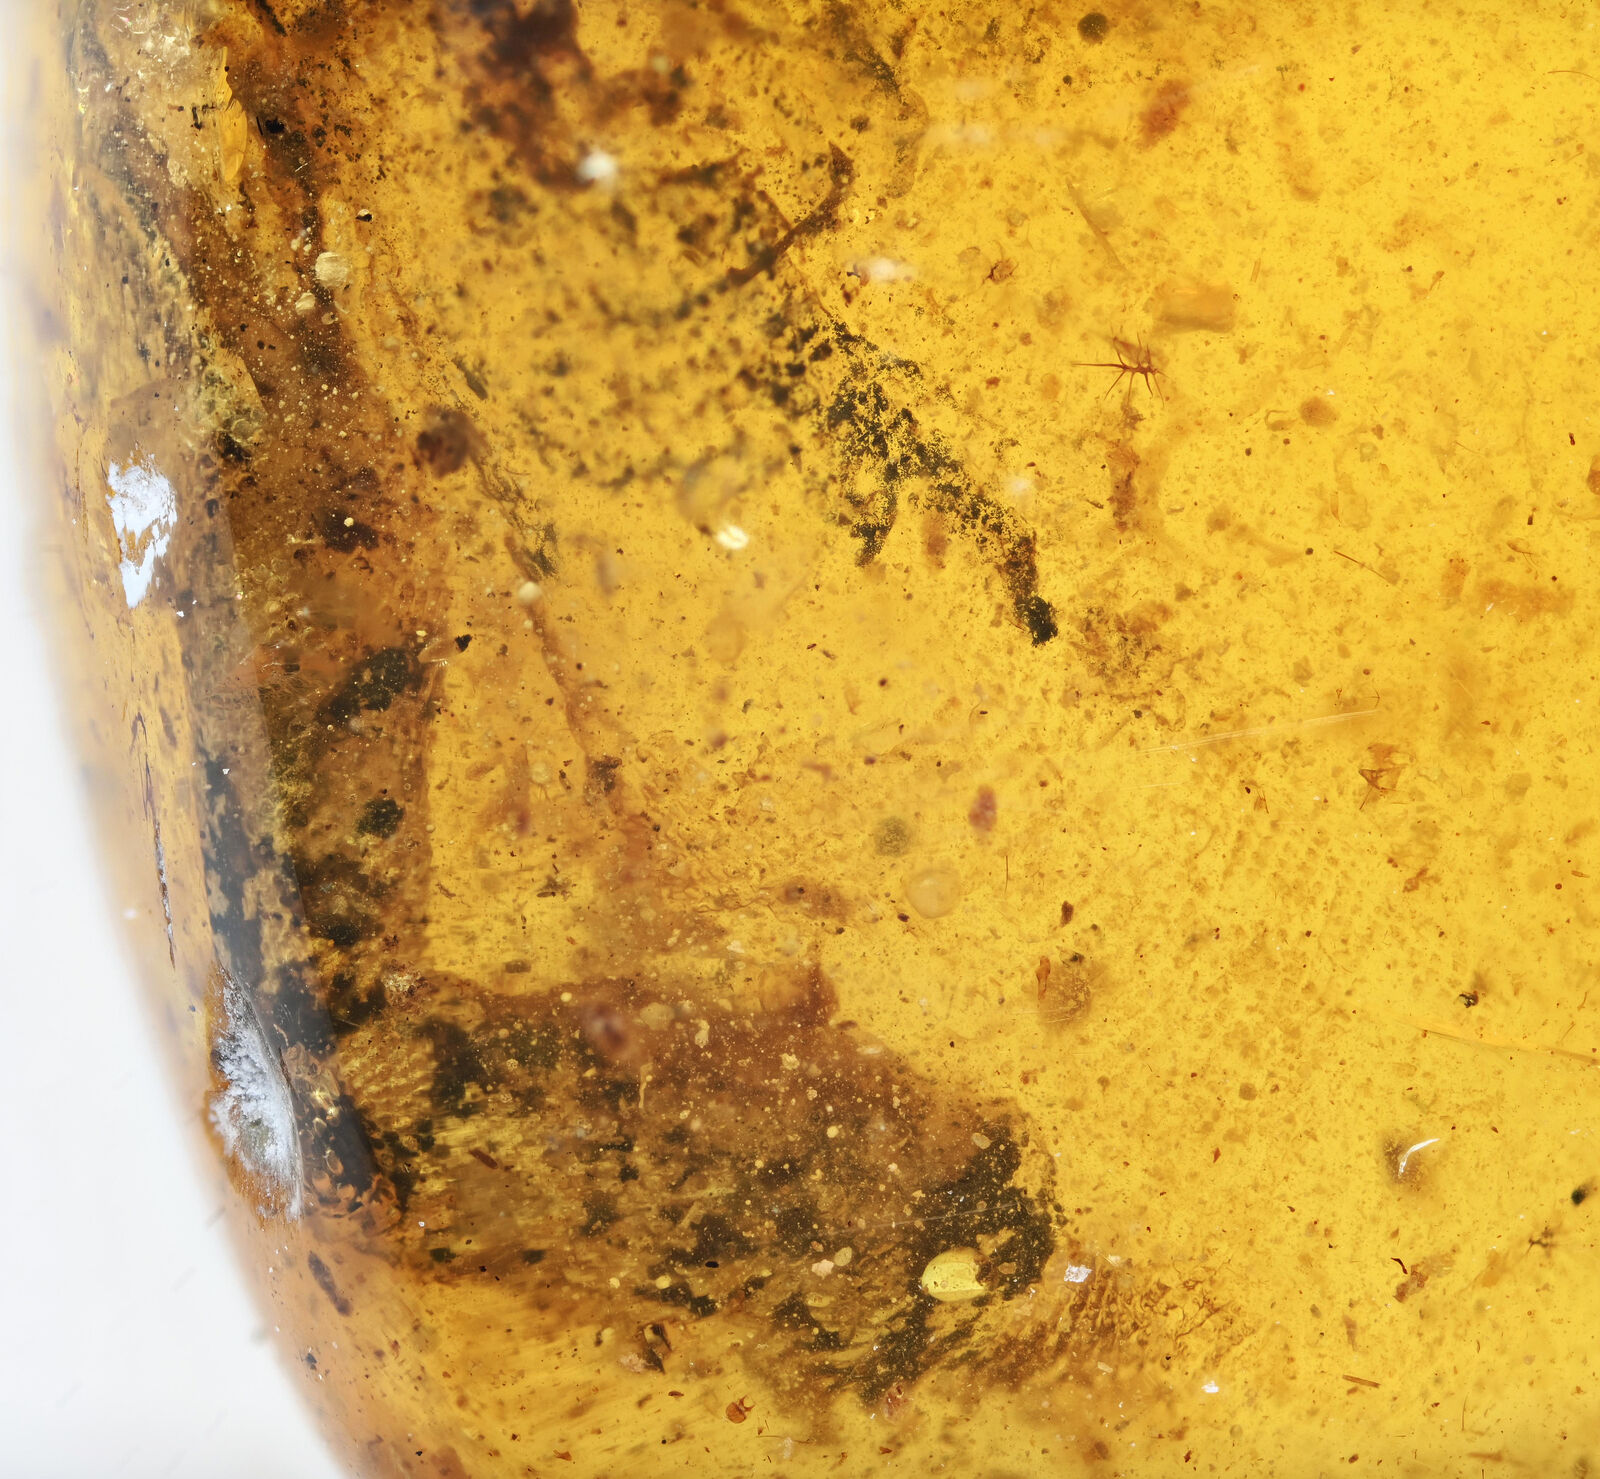 Rare Partial Lizard with arm, Fossil inclusion in Burmese Amber